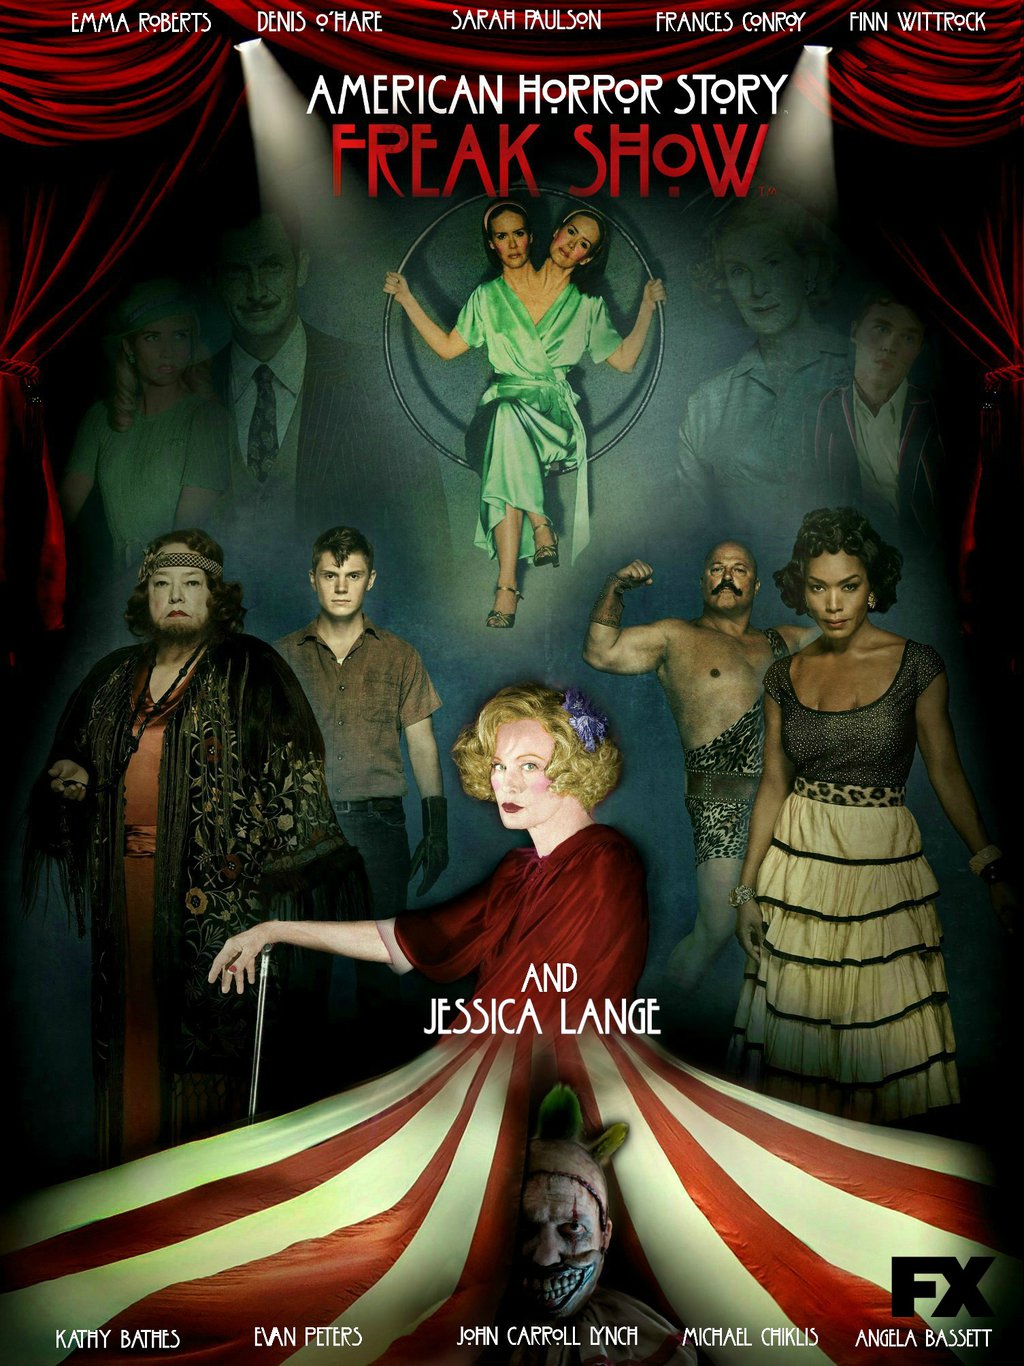 AMERICAN HORROR STORY: FREAK SHOW comes to UK Blu-ray 26th October 2015